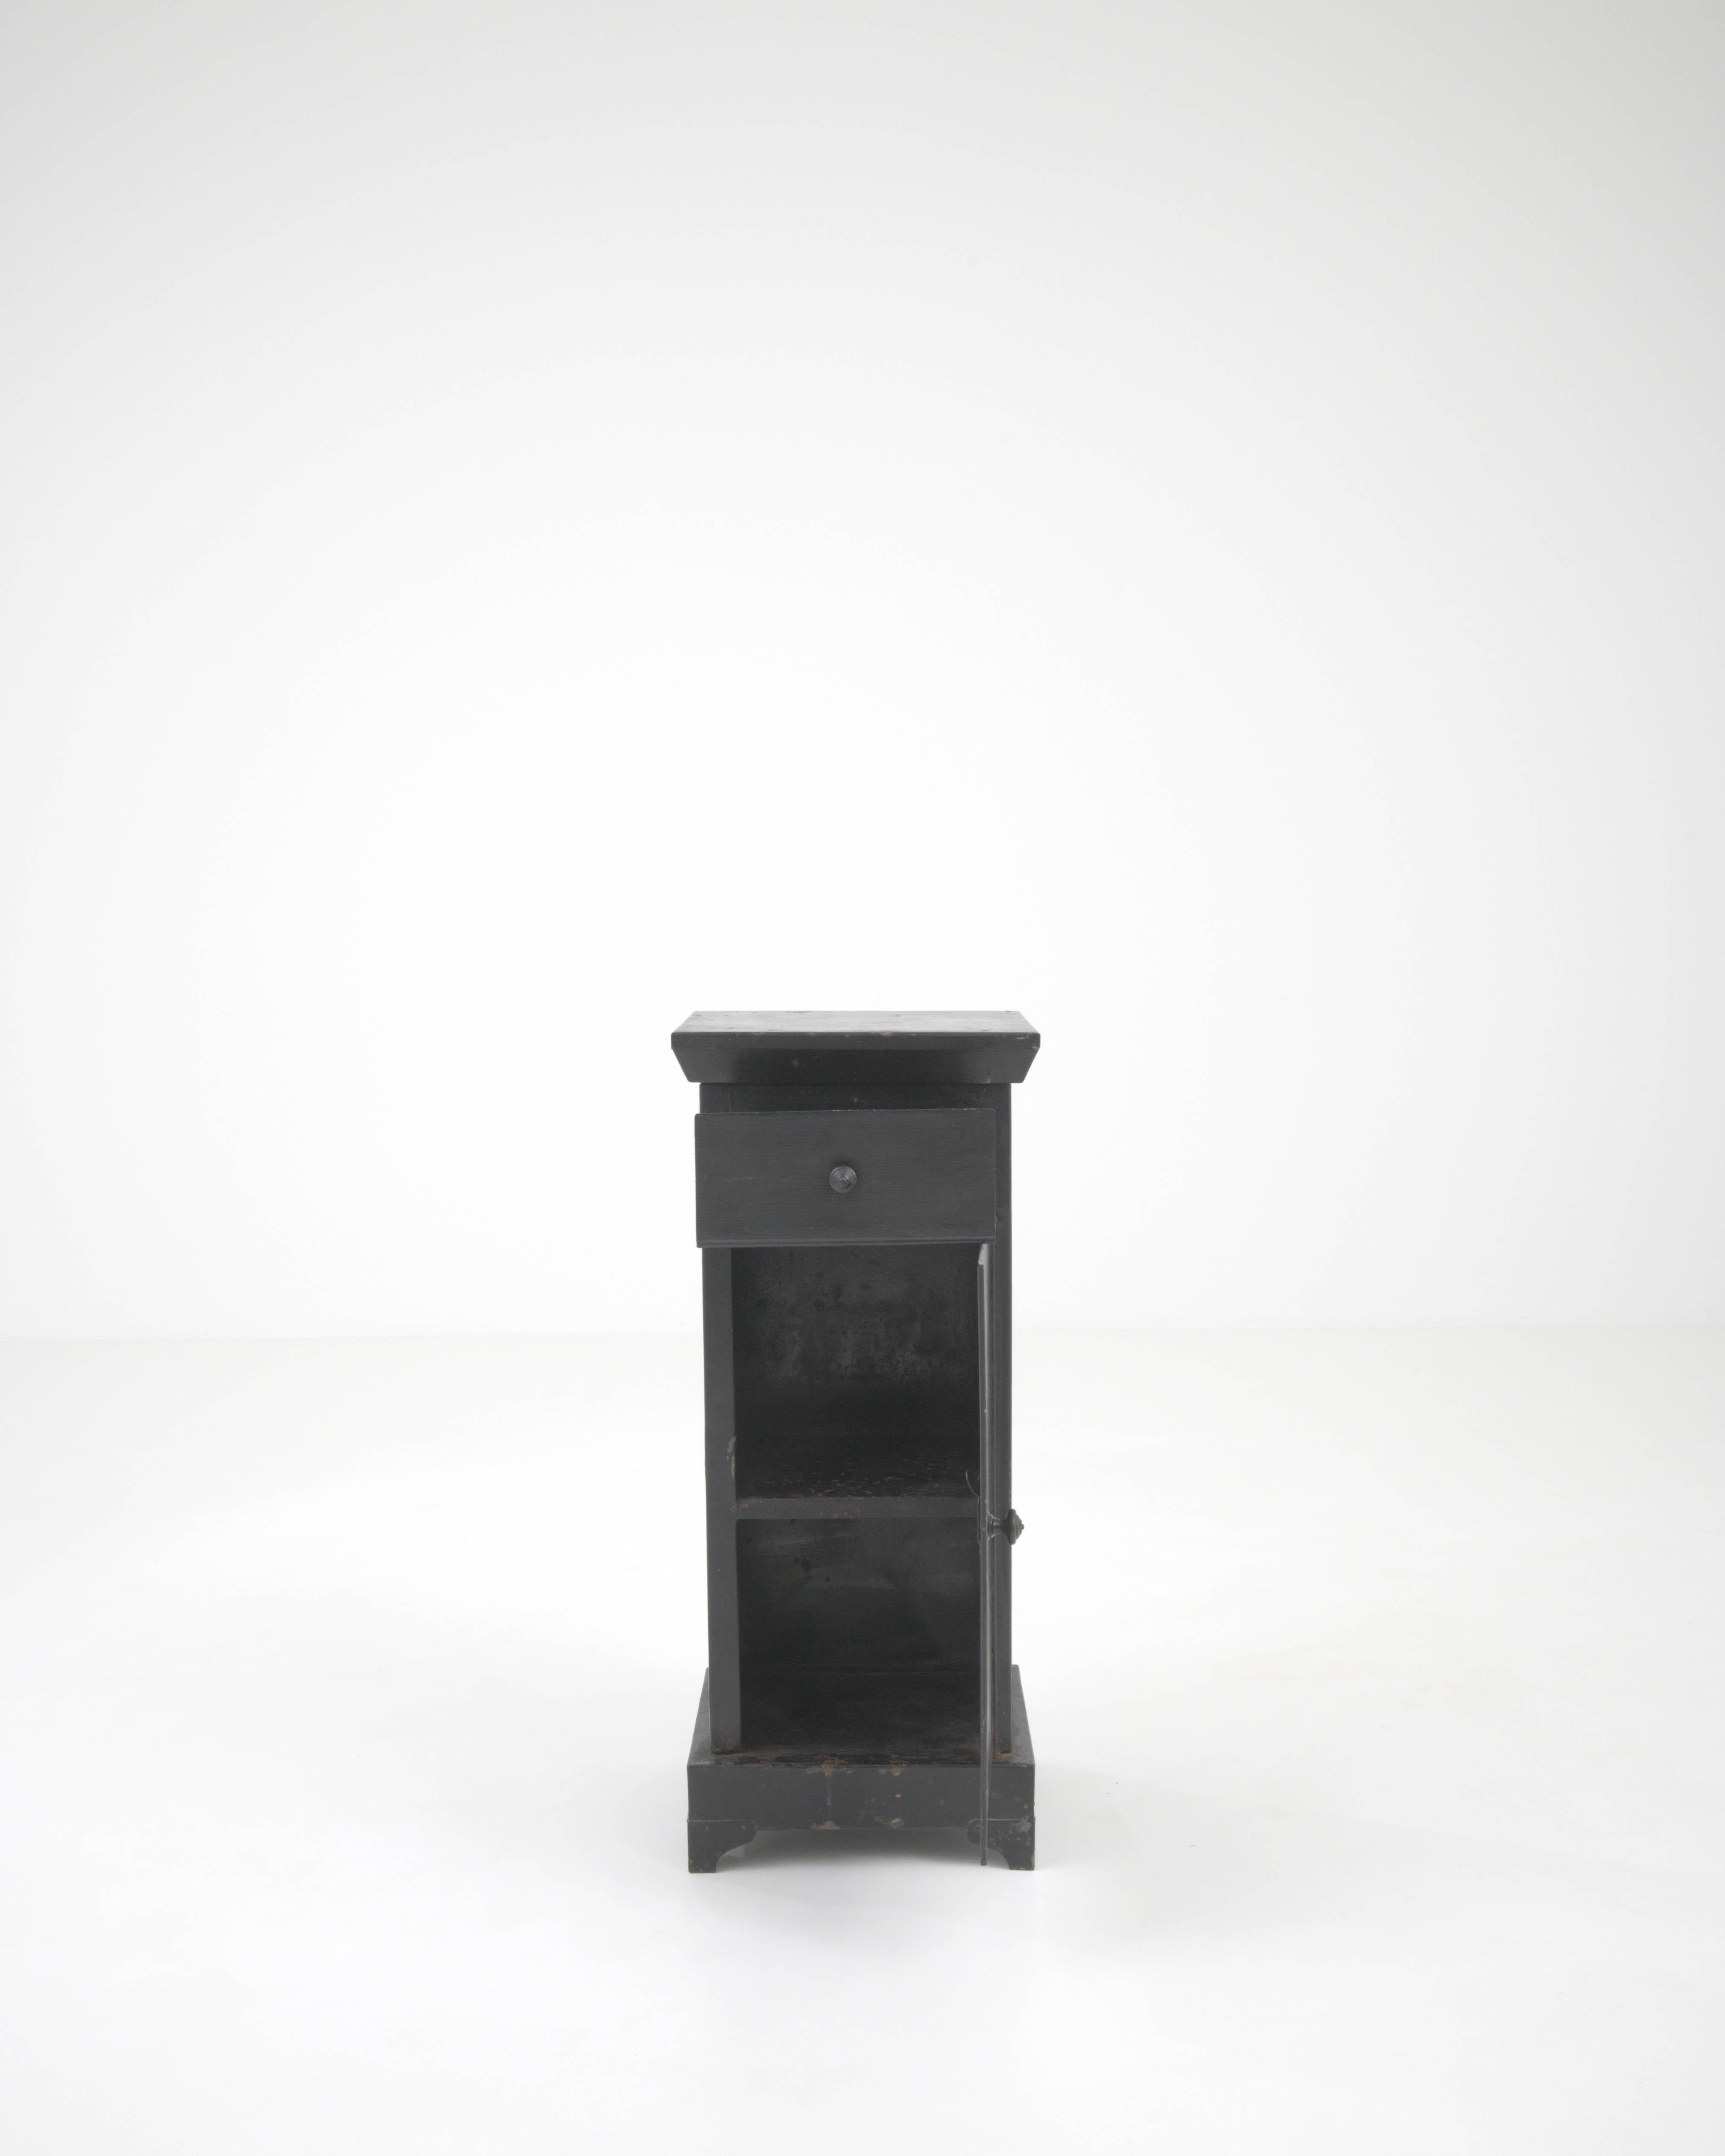 This early 20th-century French metal side table exudes an industrial charm coupled with minimalist elegance. The sleek, dark metal construction provides a sturdy and durable frame, while the subtle patina and wear suggest a storied past. A compact